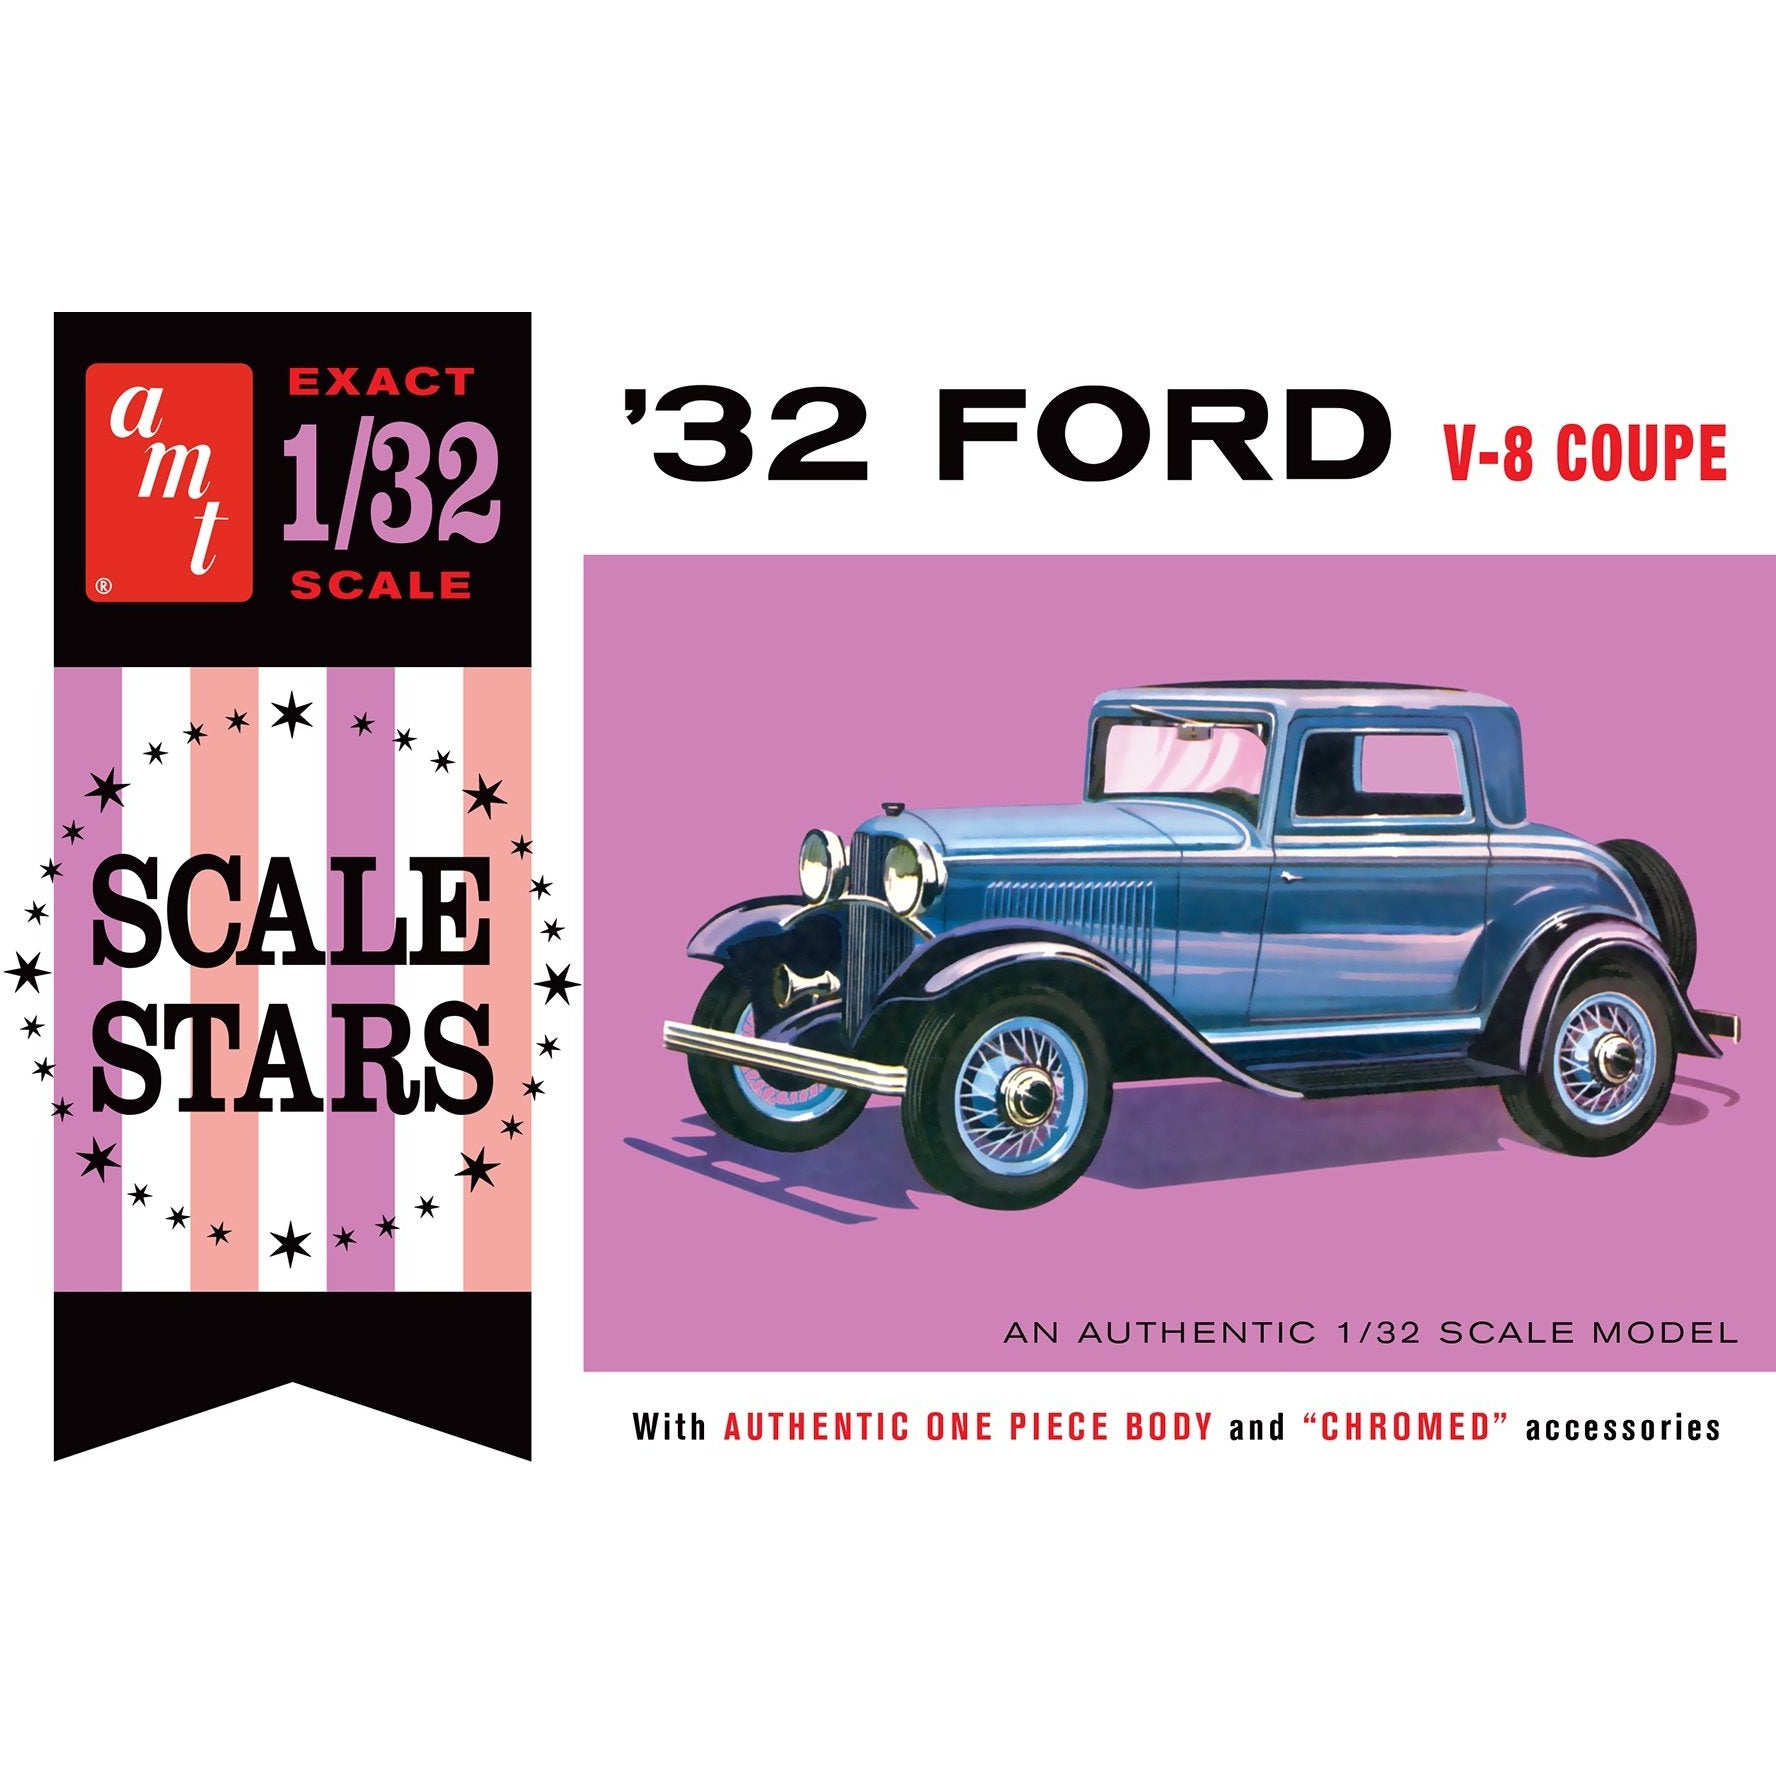 1932 Ford V-8 Coupe 1/32 Model Car Kit #1181 by AMT